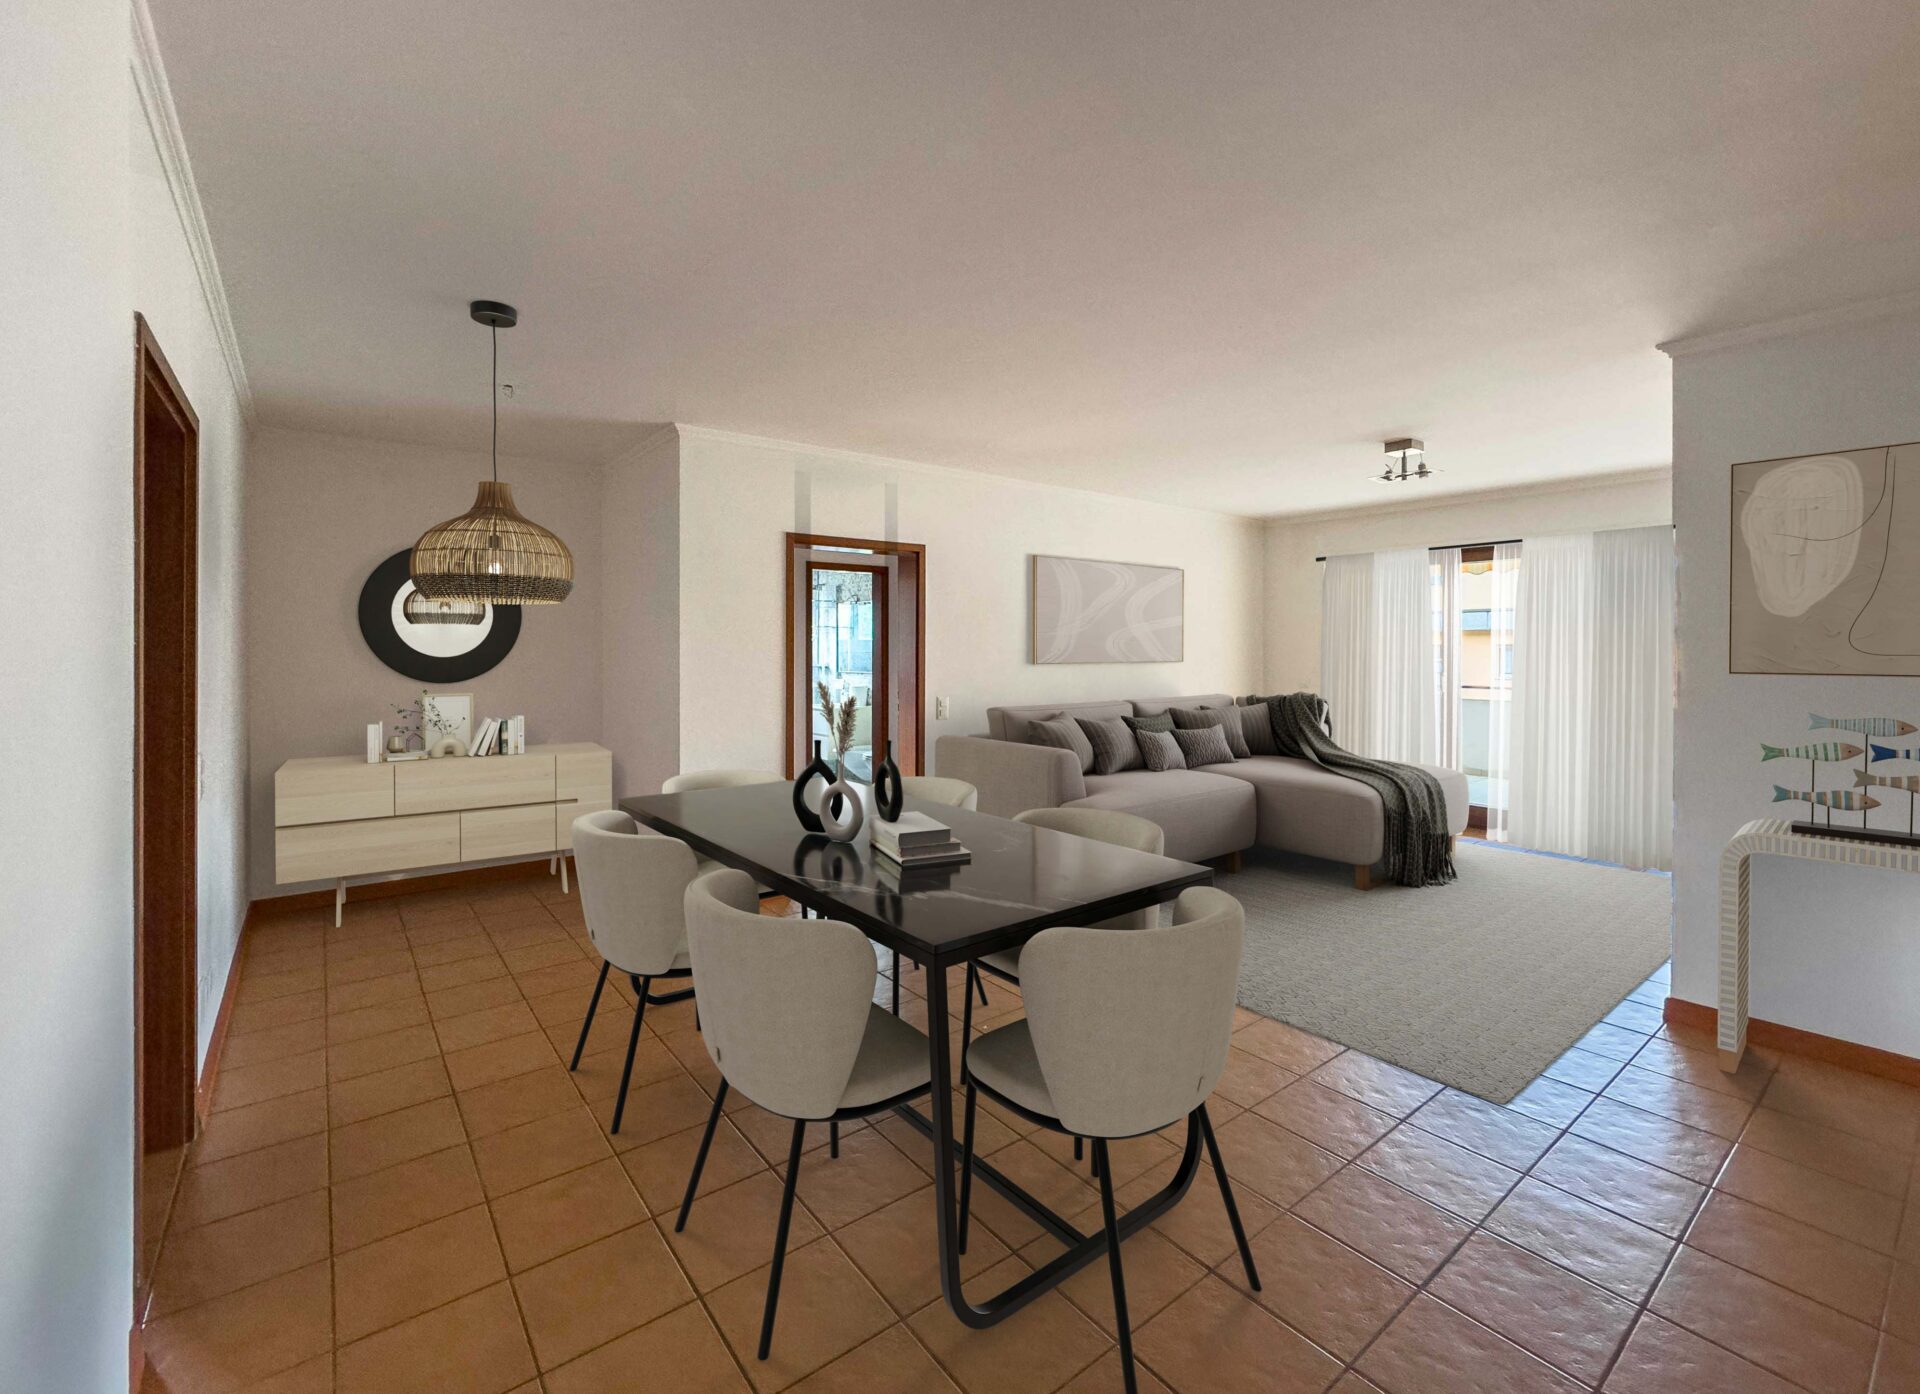 Apartment for sale in Caslano also as a secondary residence